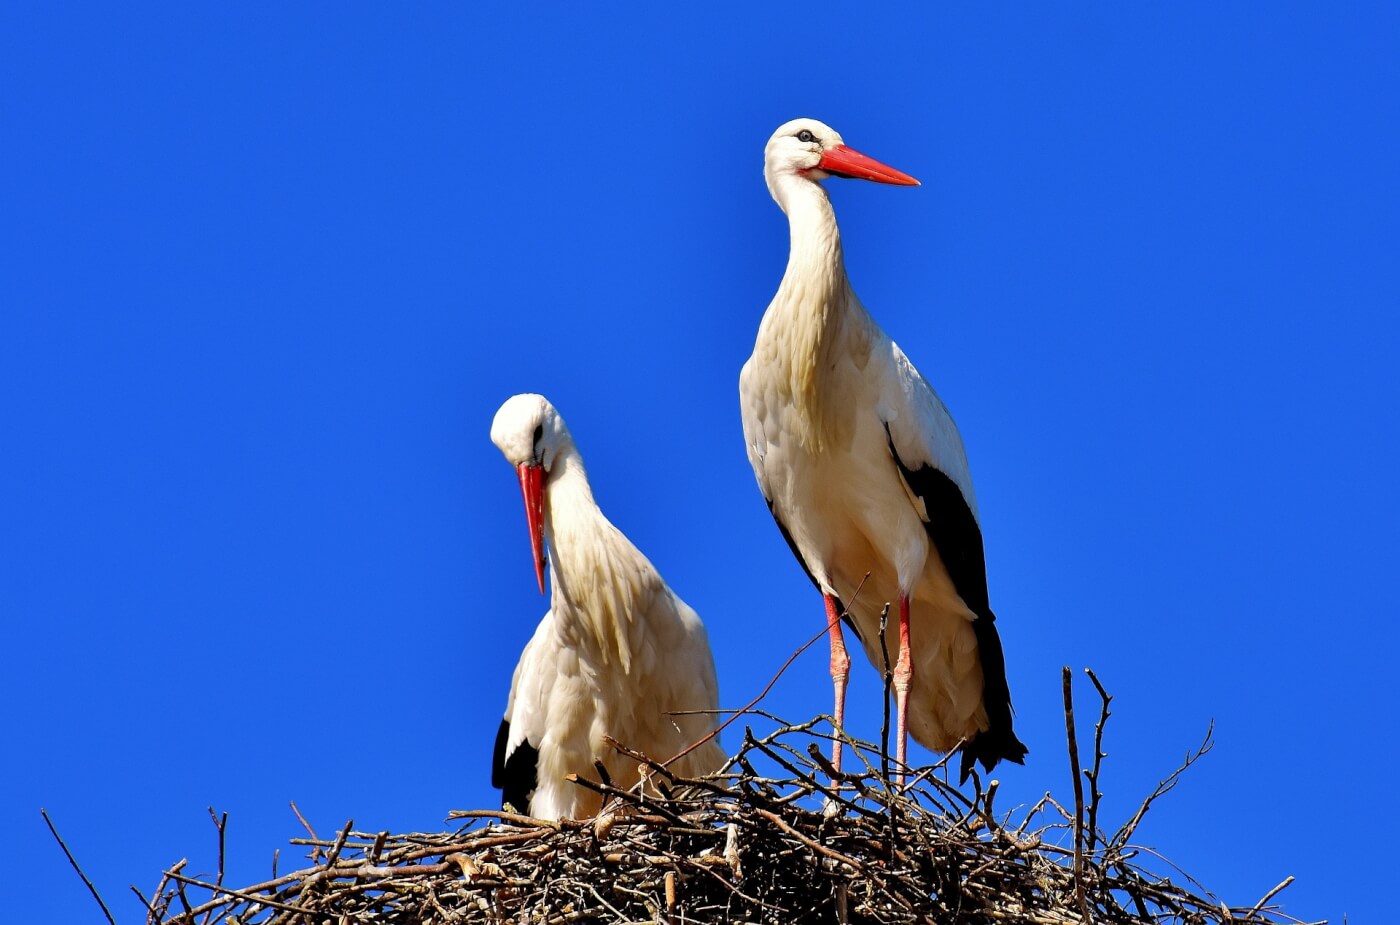 two storks on nest with blue sky